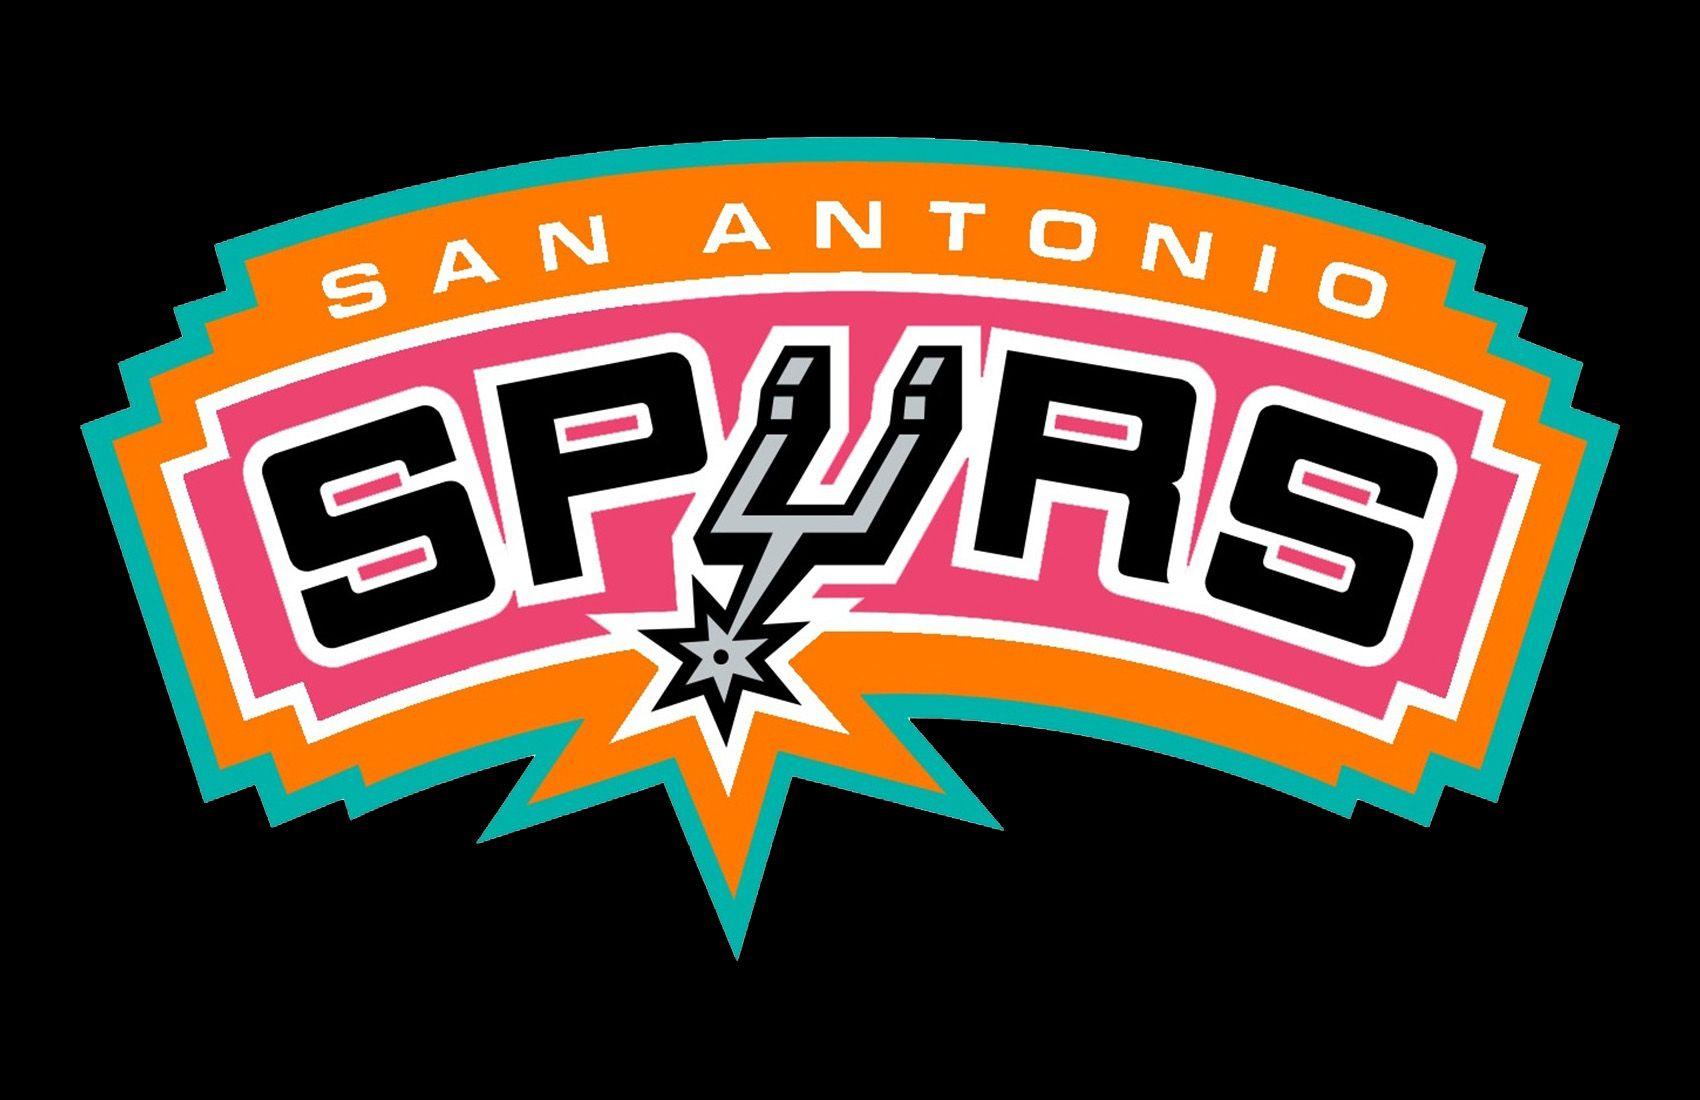 Spurs Logo - San Antonio Spurs Logo, San Antonio Spurs Symbol, Meaning, History ...